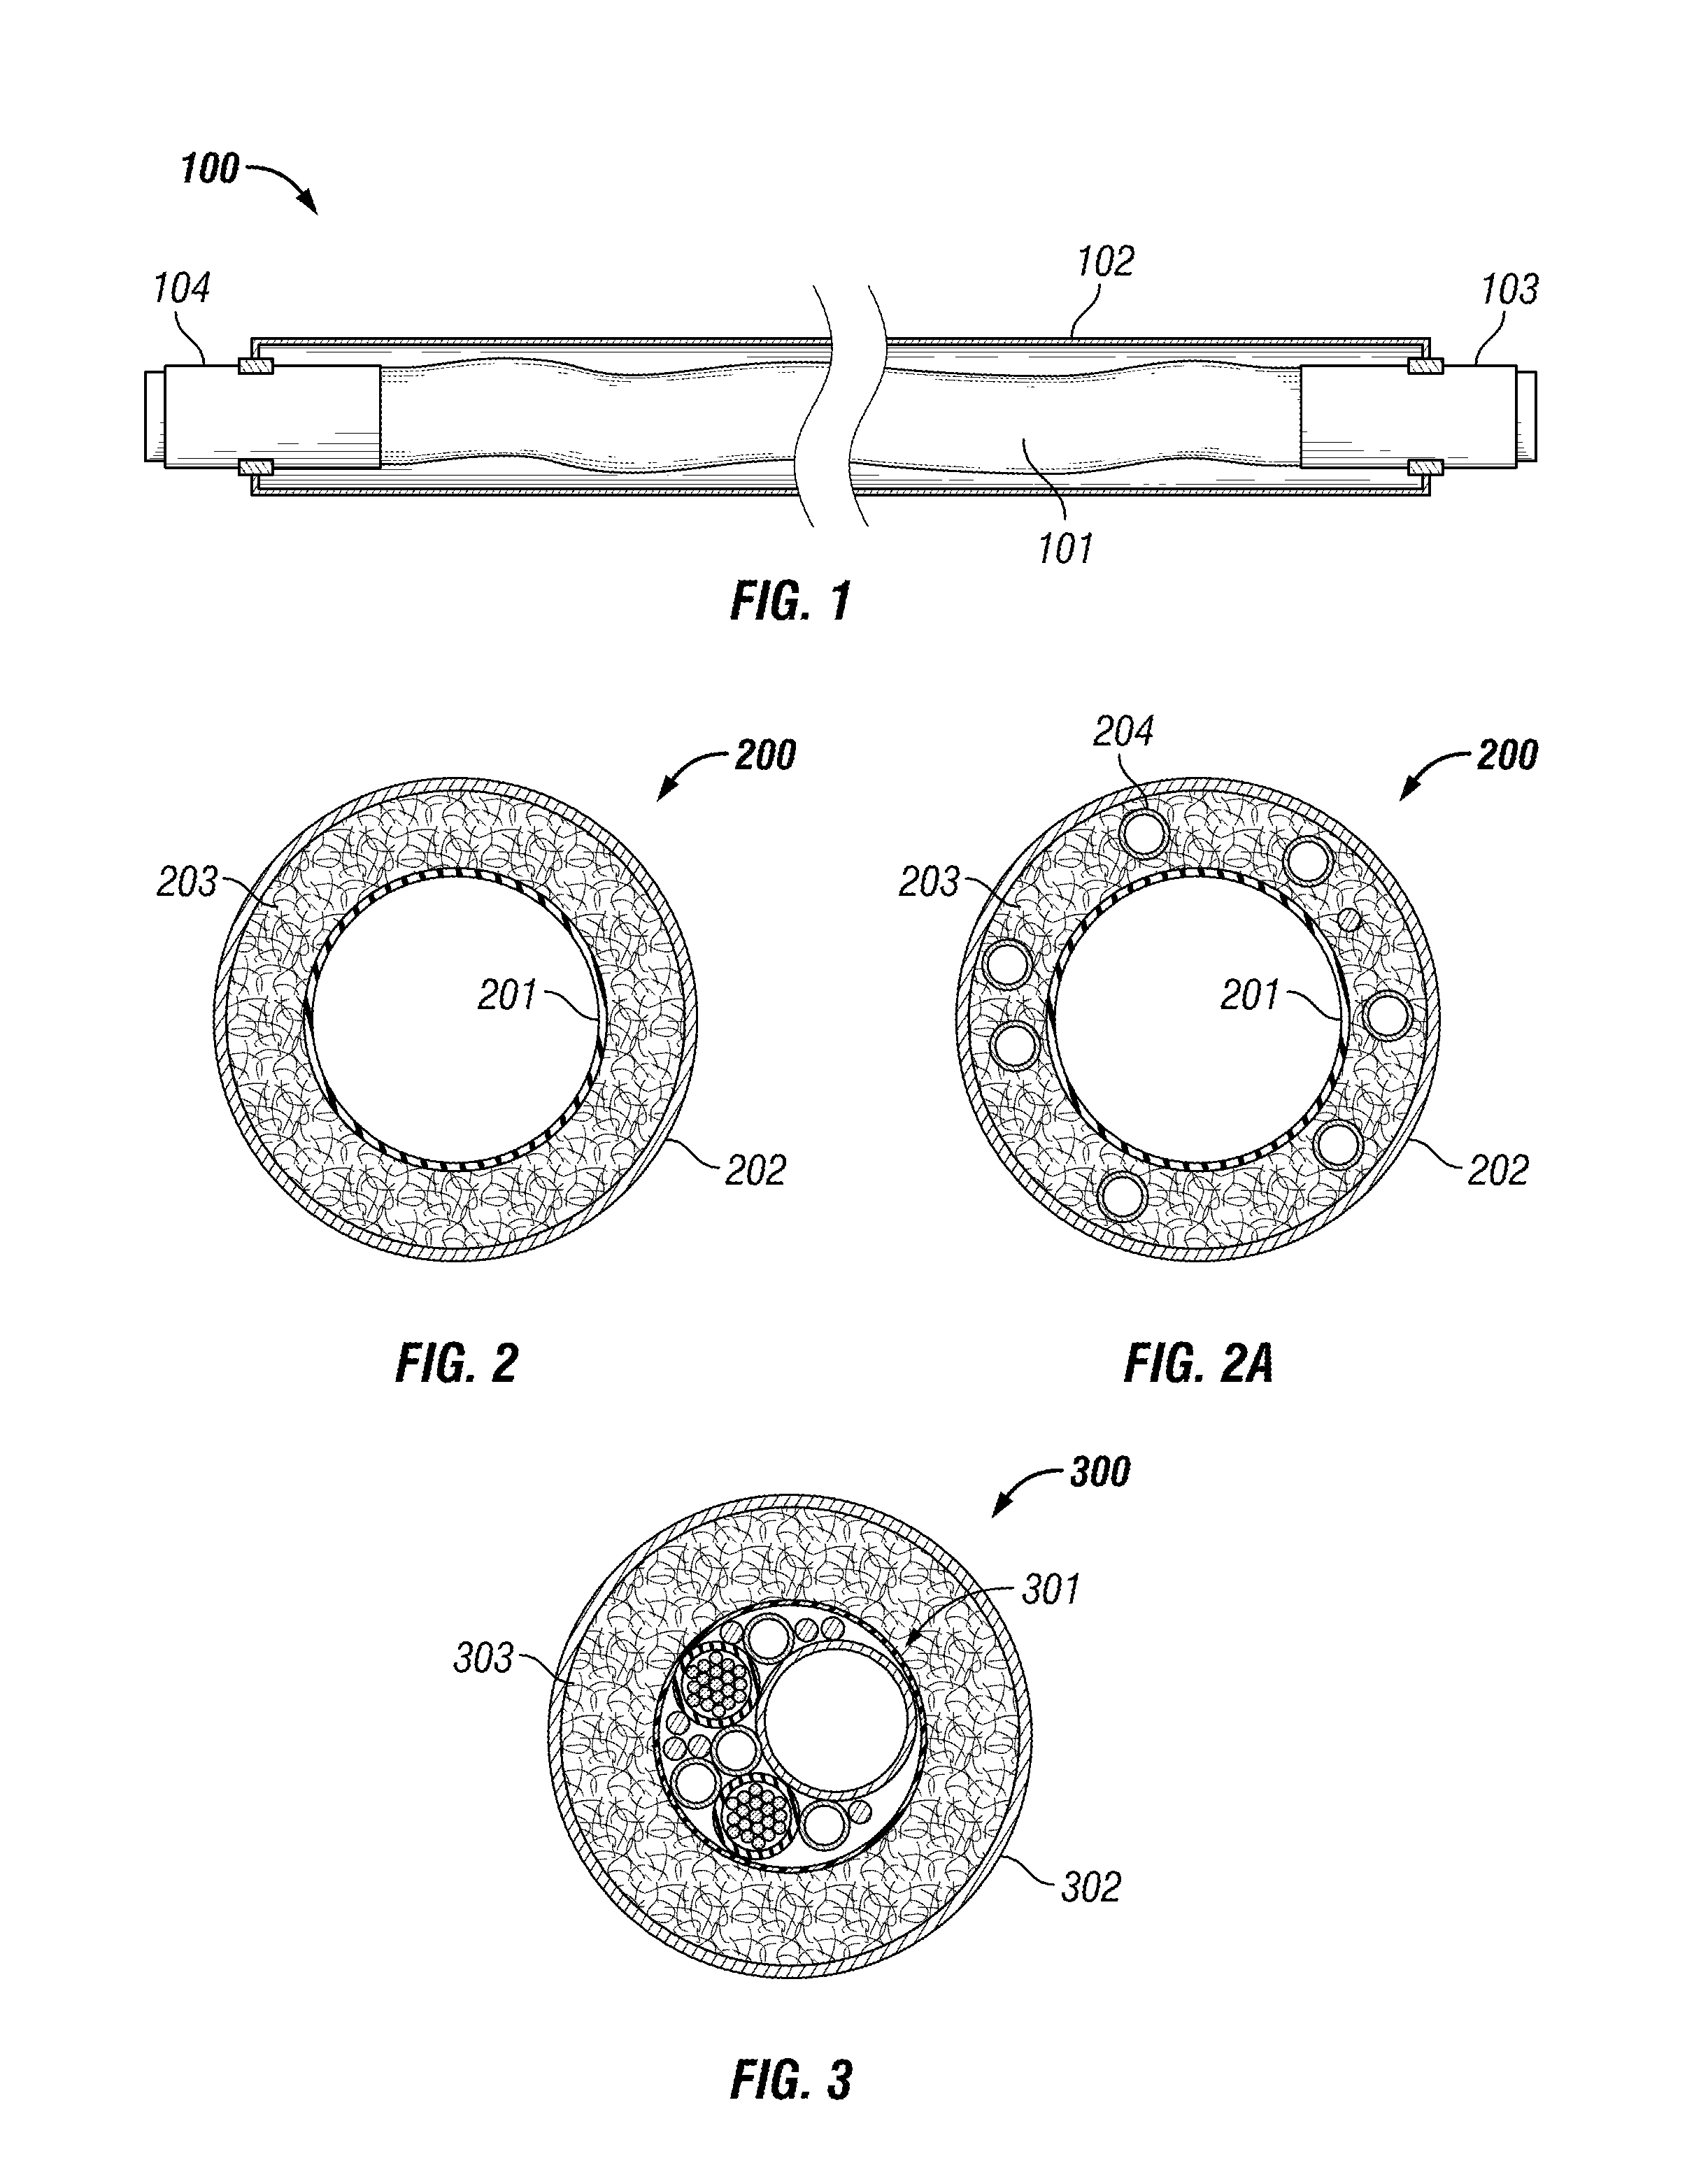 Pipe-in-pipe apparatus including an engineered pipe